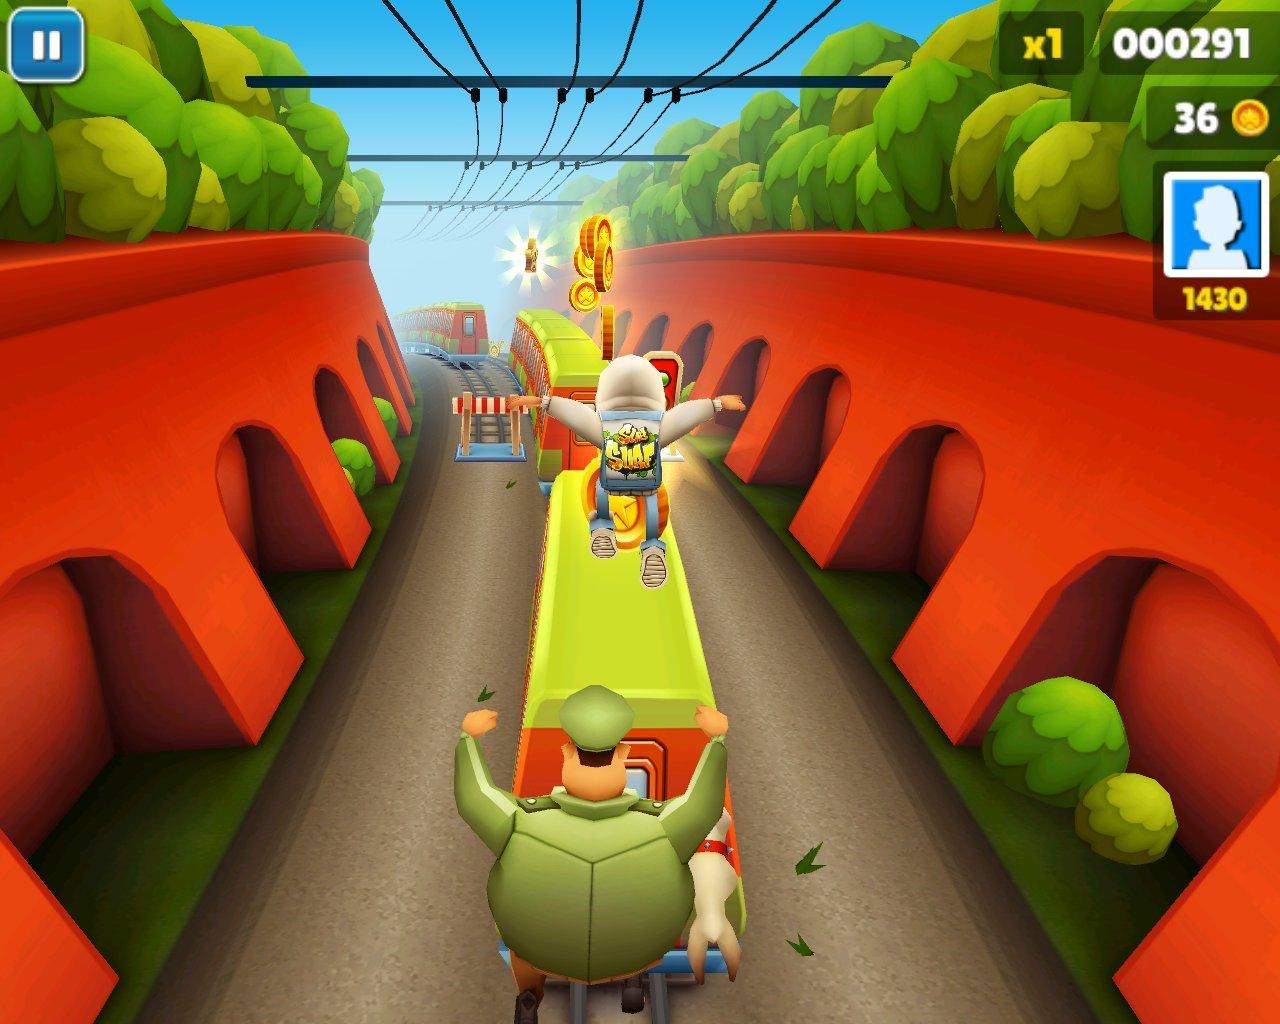 Aicasd Media Game Art: 18 Image Download Subway Surfers For PC